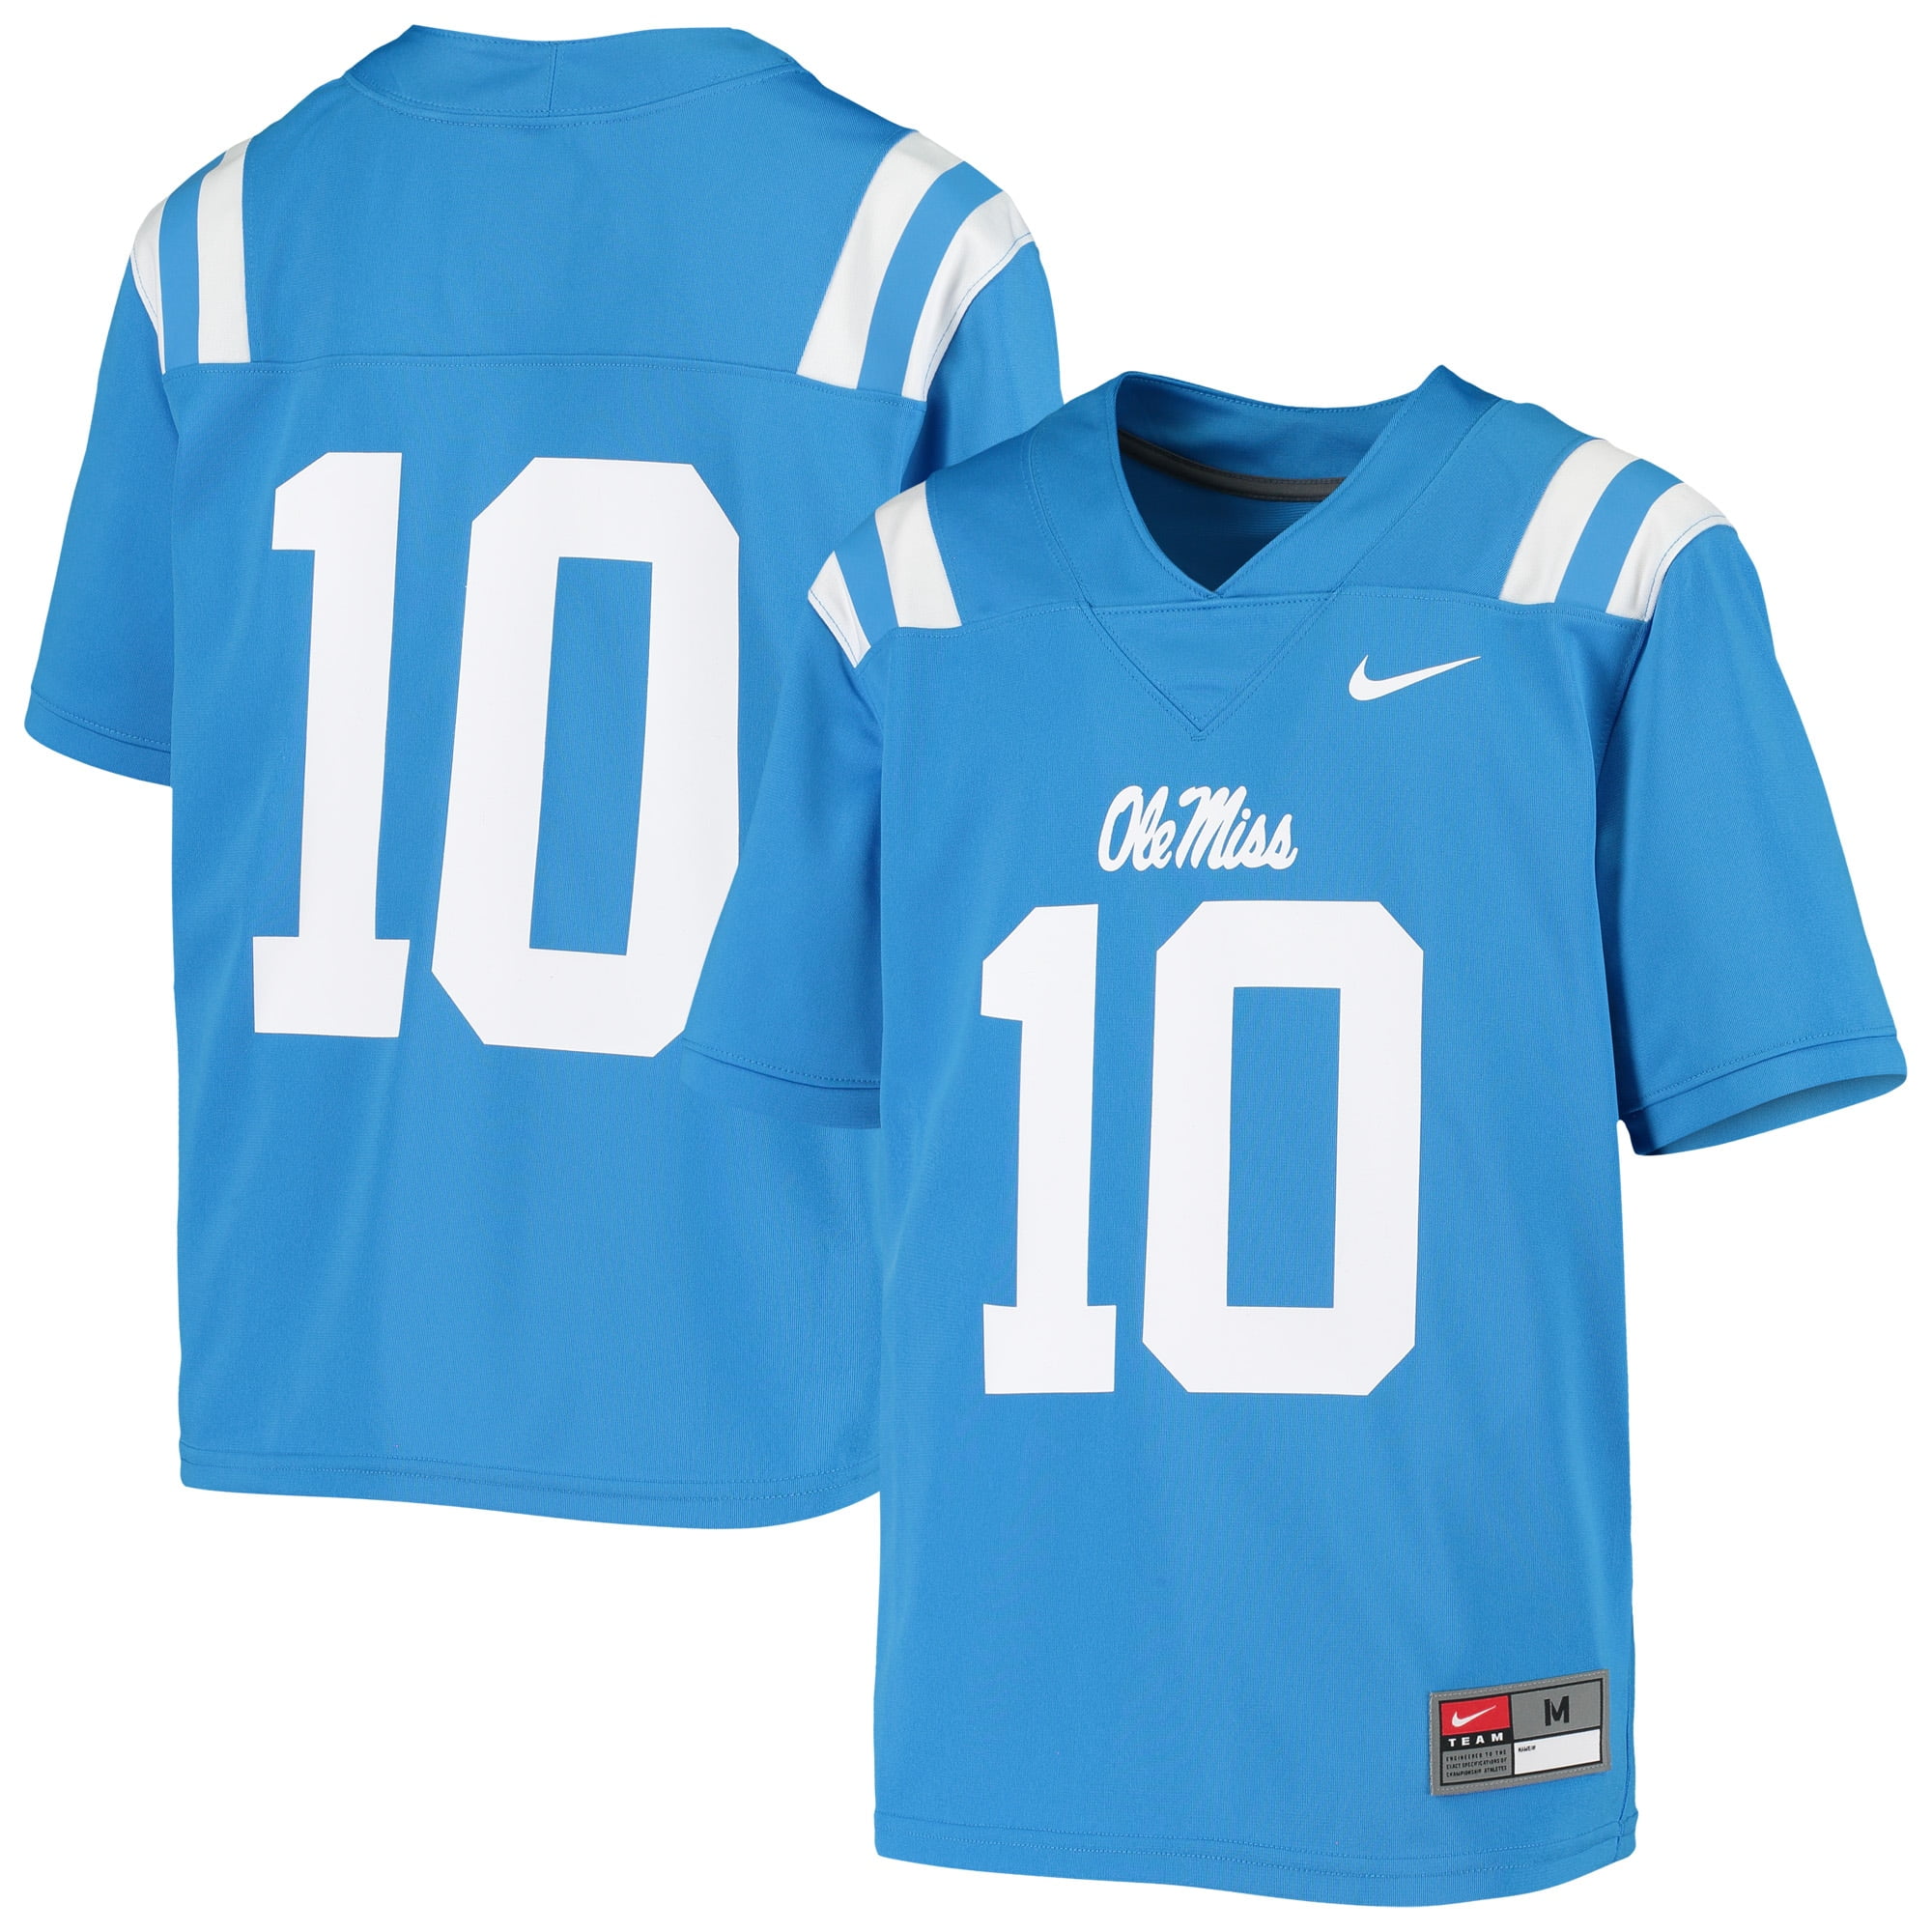 ole miss baby blue football jersey